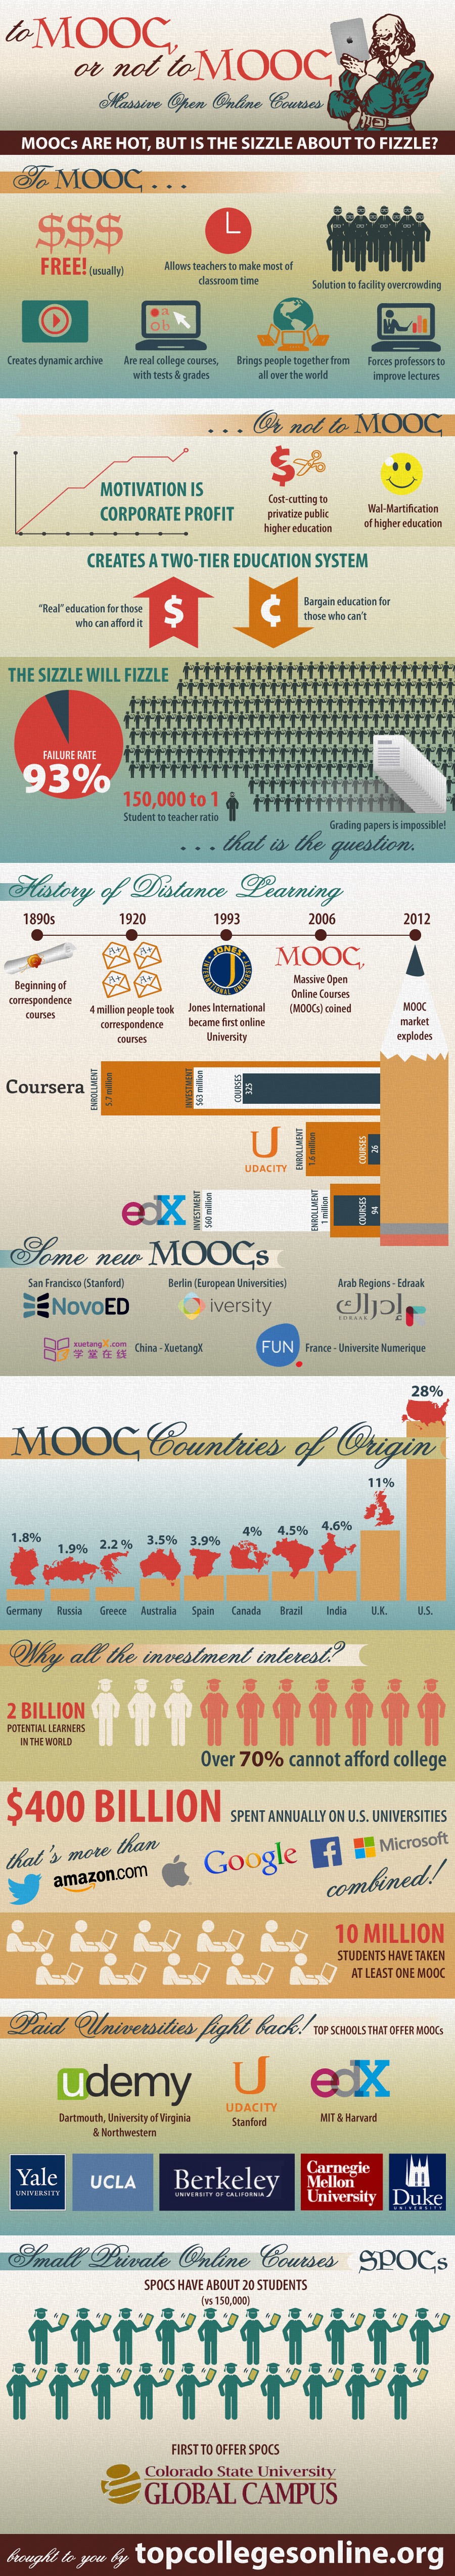 To MOOC or Not to MOOC Infographic